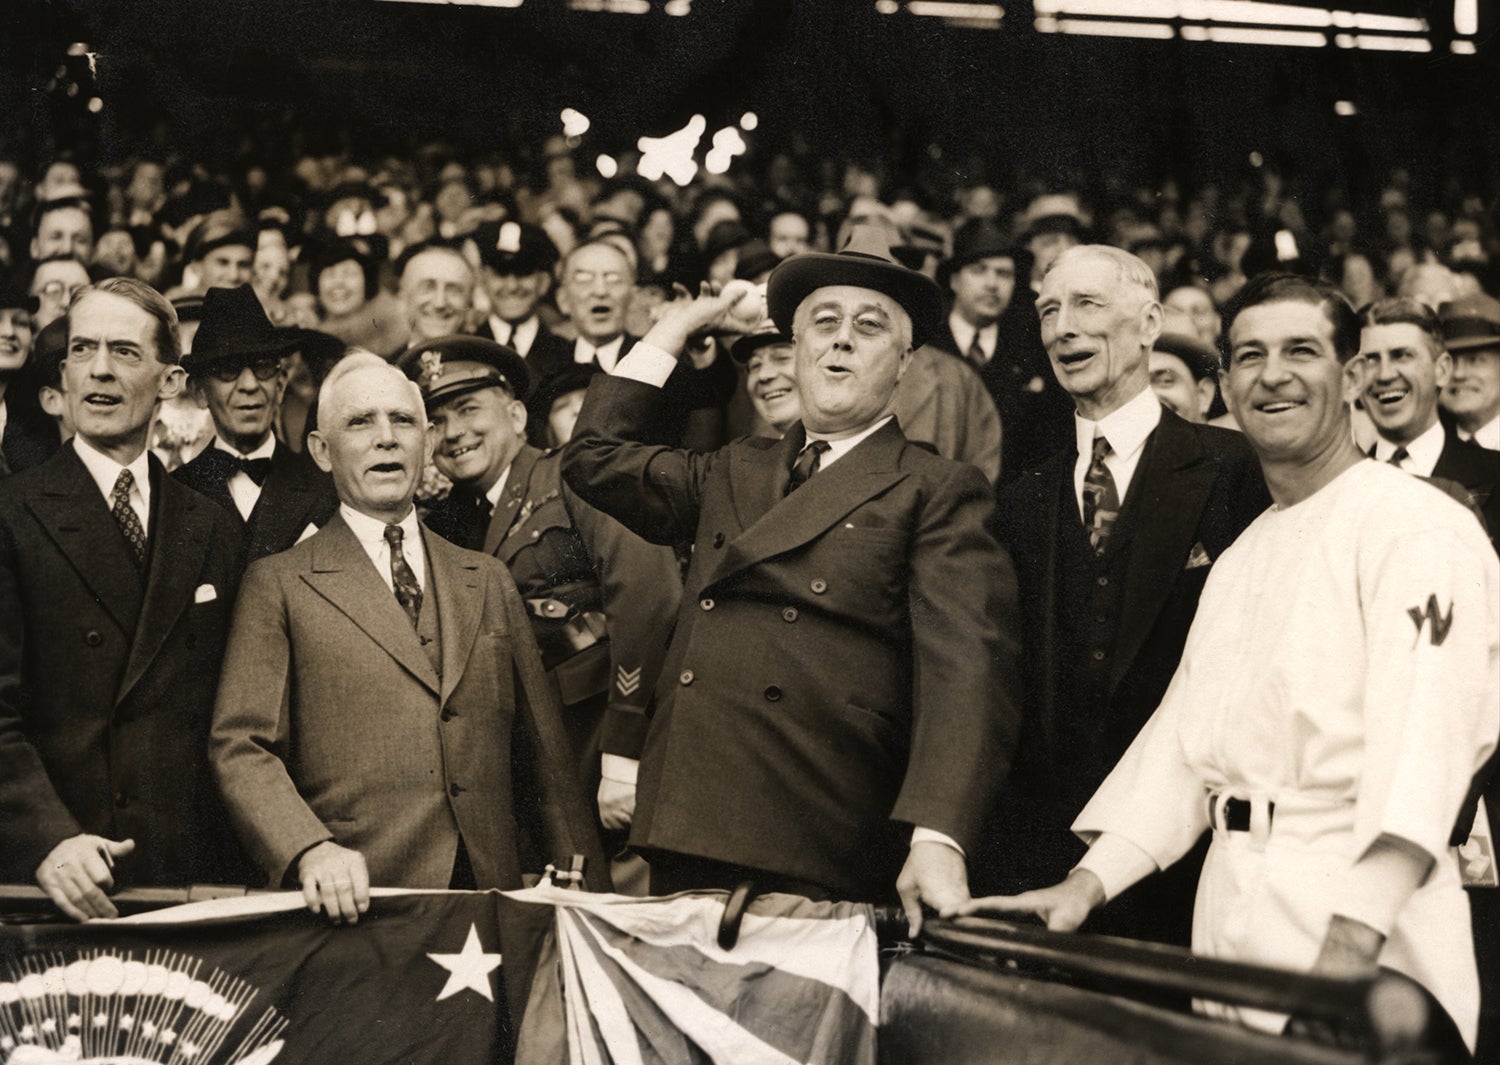 #Shortstops: Commissioner Landis’ letter sparked a historic response from FDR